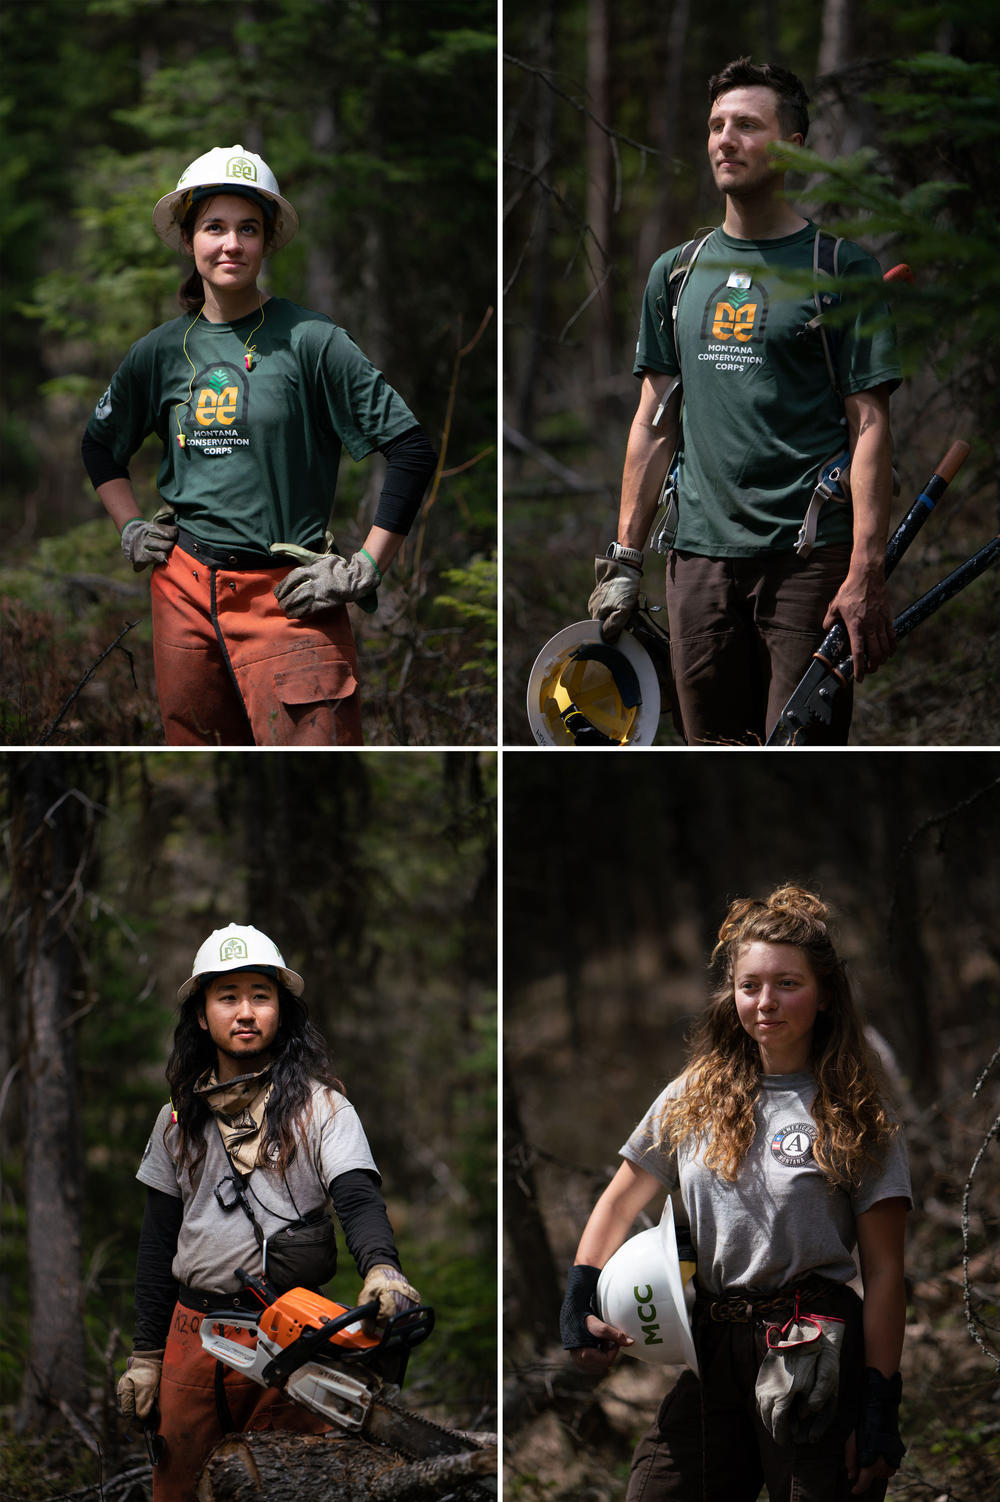 Clockwise from top: Emily Brown, 22; Jack O'Hanlon, 23; Kaile Kimball, 23; and Teppei Fujimoto, 25, members of the Montana Conservation Corps.